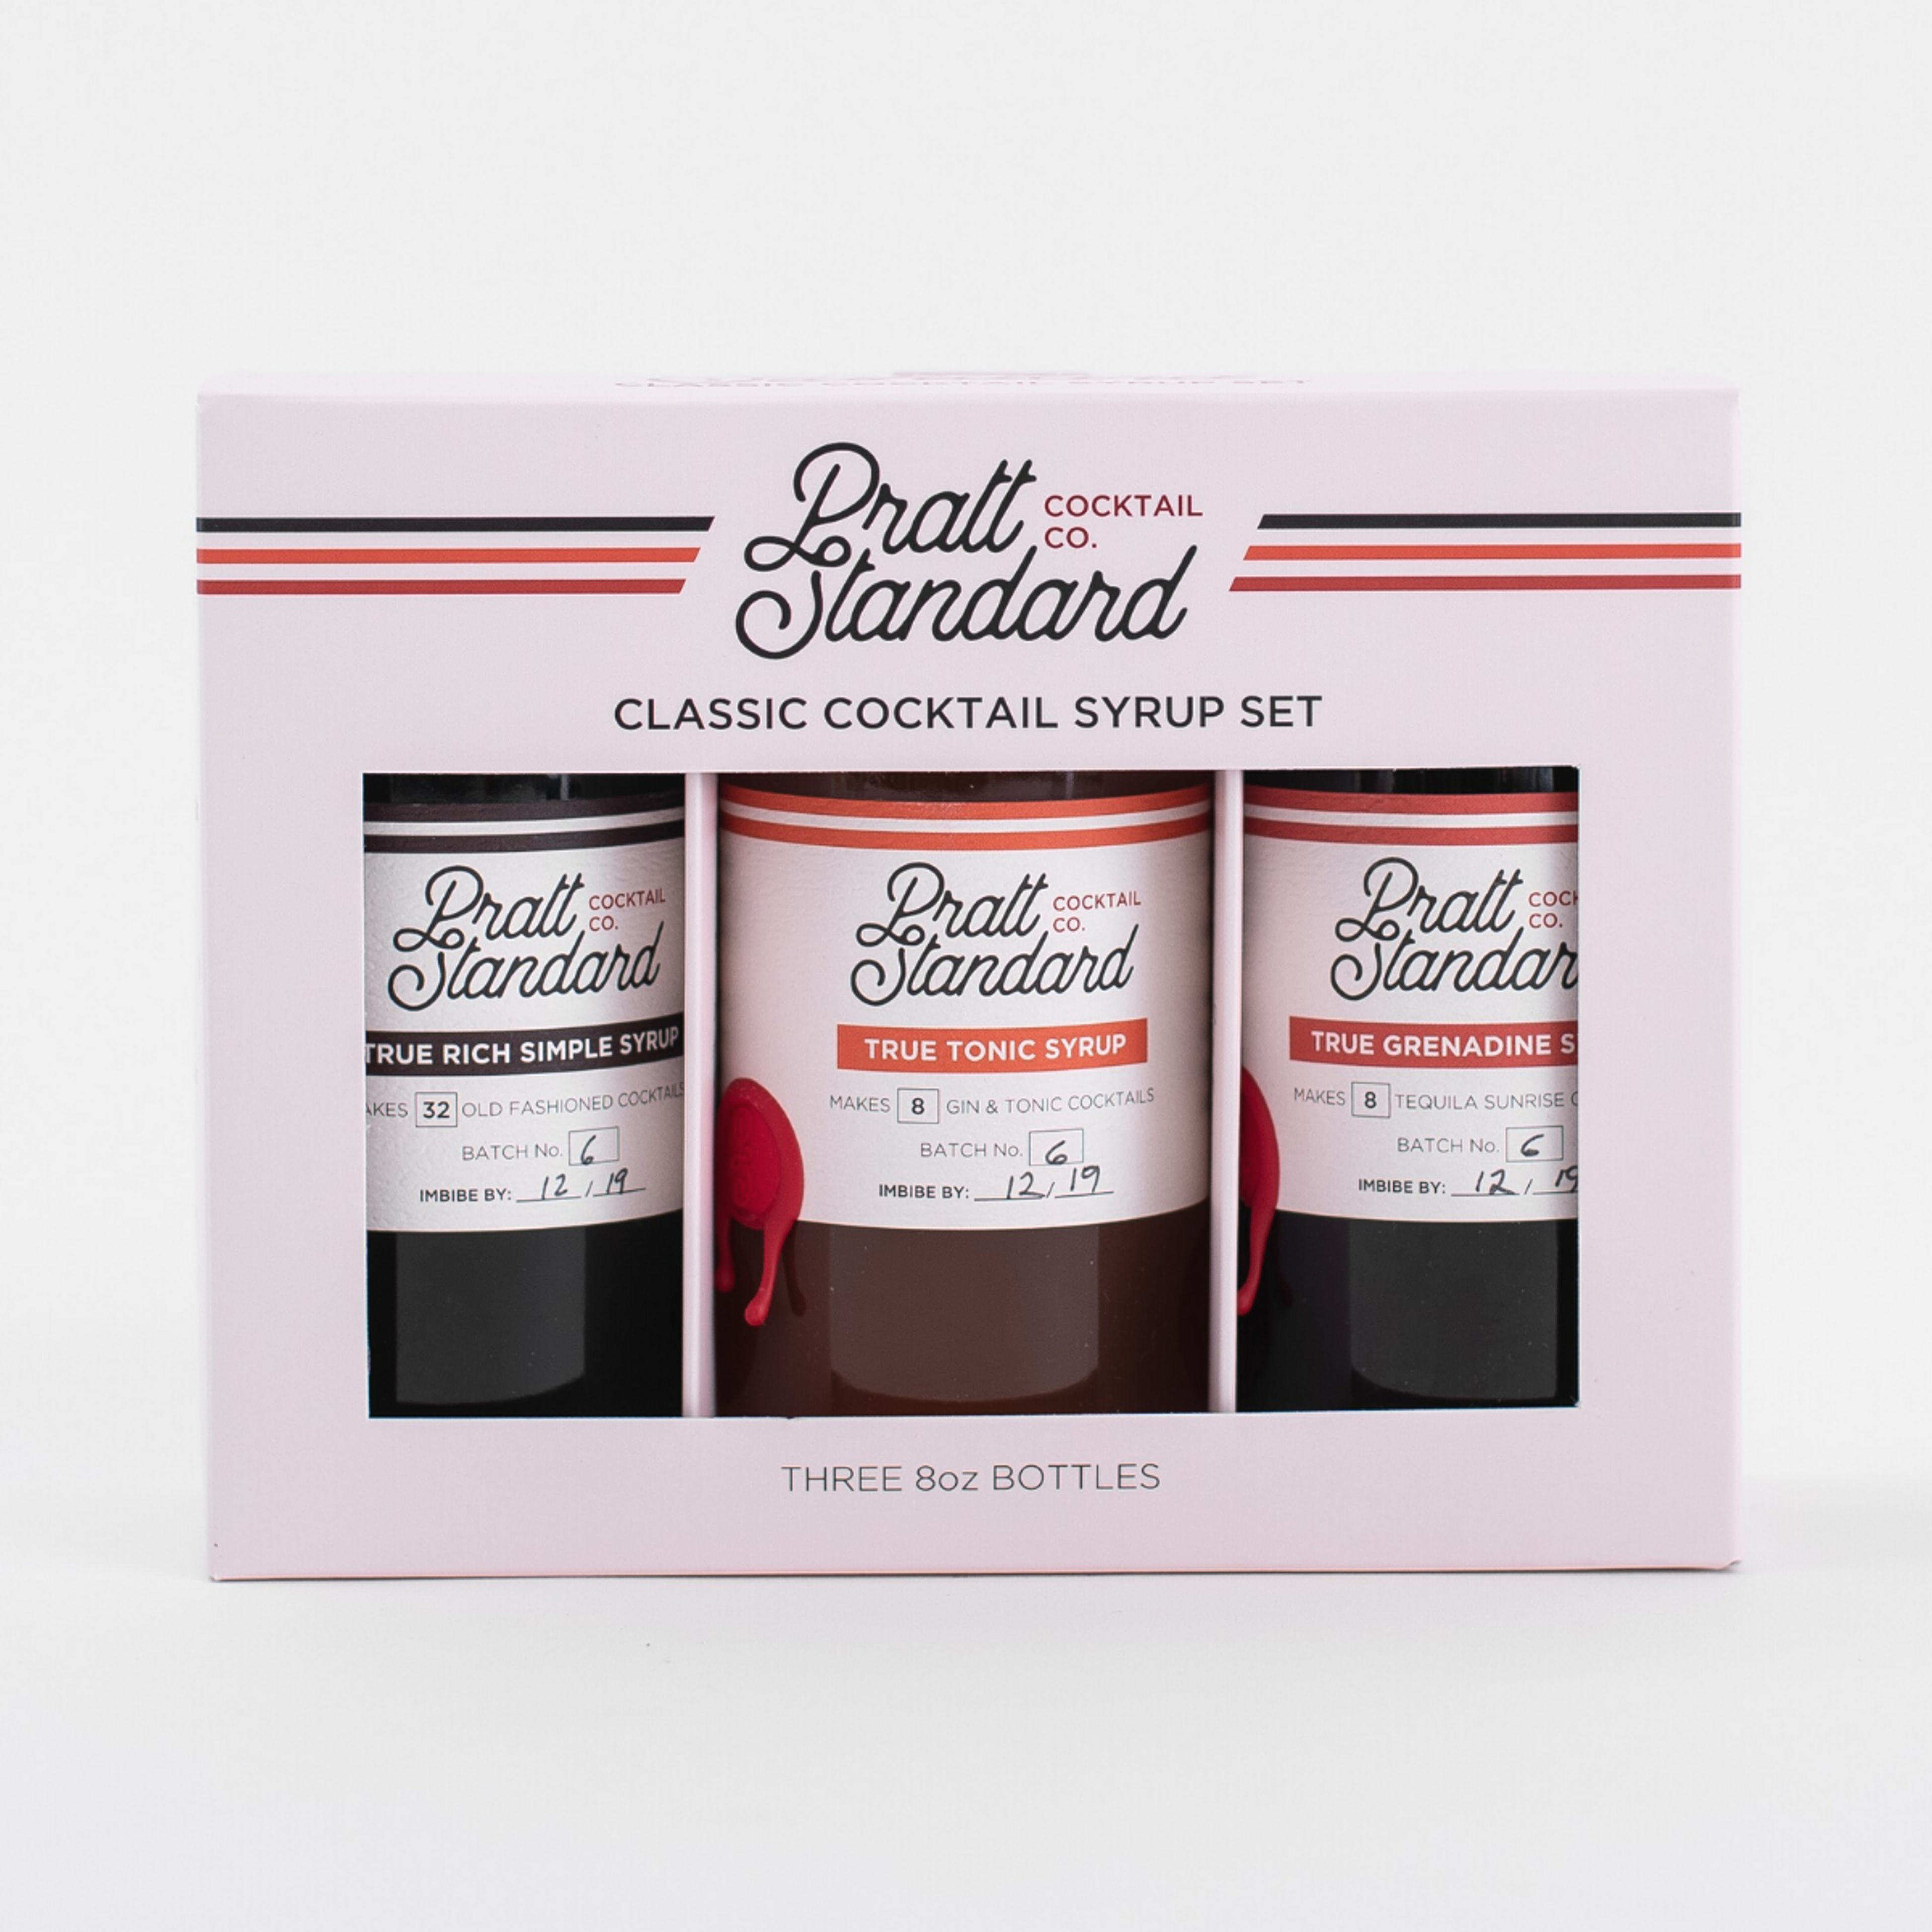 Classic Cocktail Syrup Set